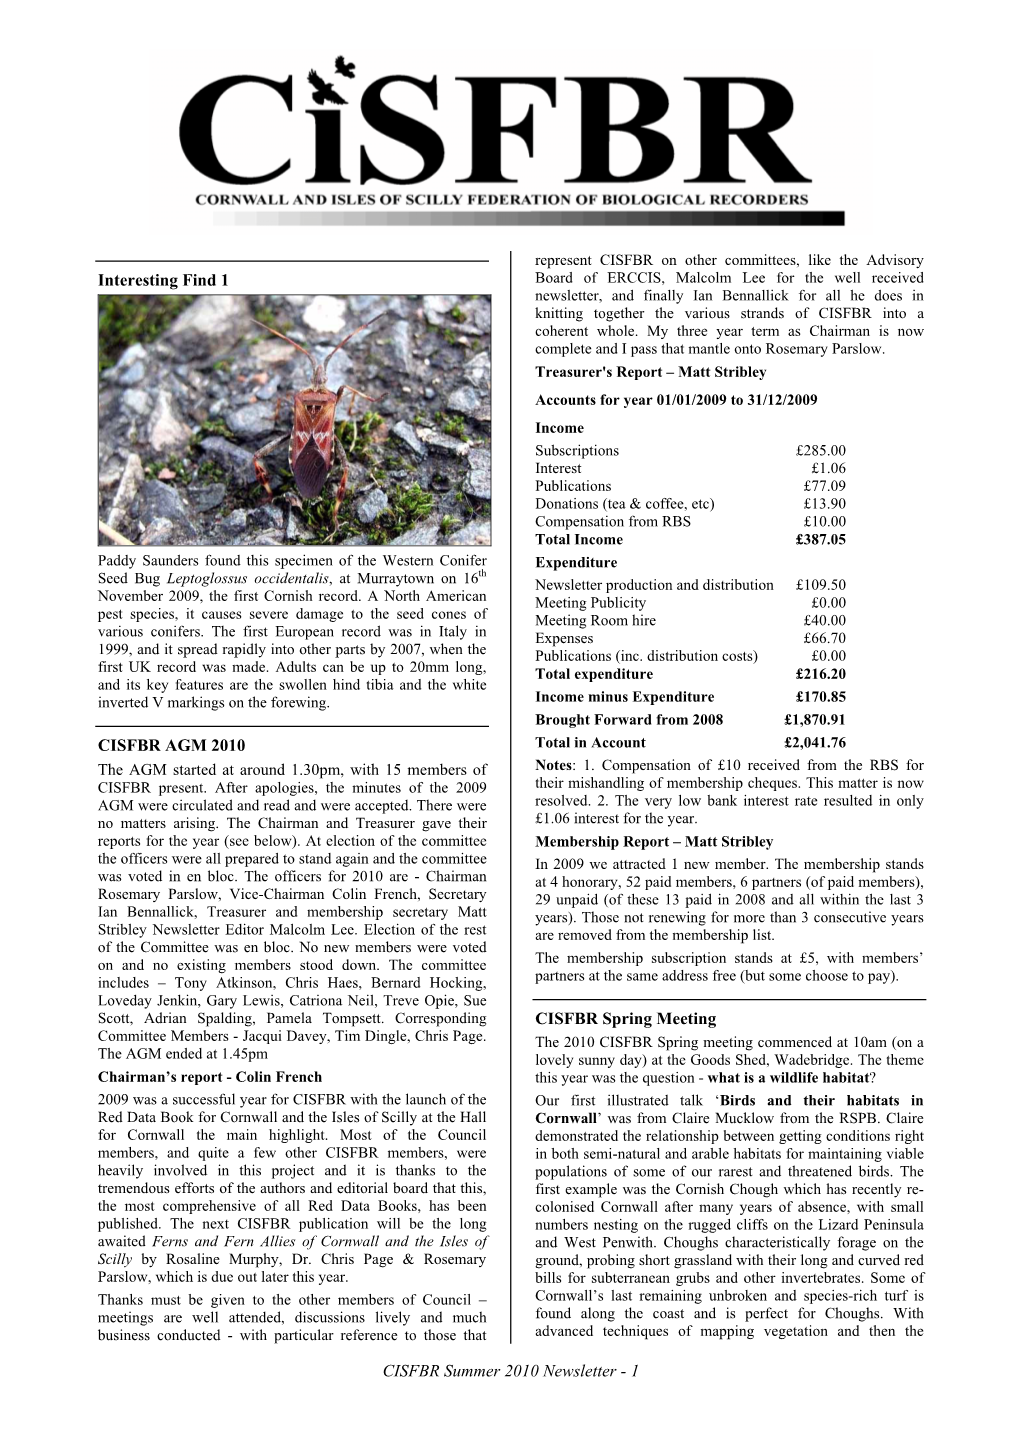 CISFBR Summer 2010 Newsletter - 1 Cross-Referencing with Site Visits to Assess the Condition of Plants